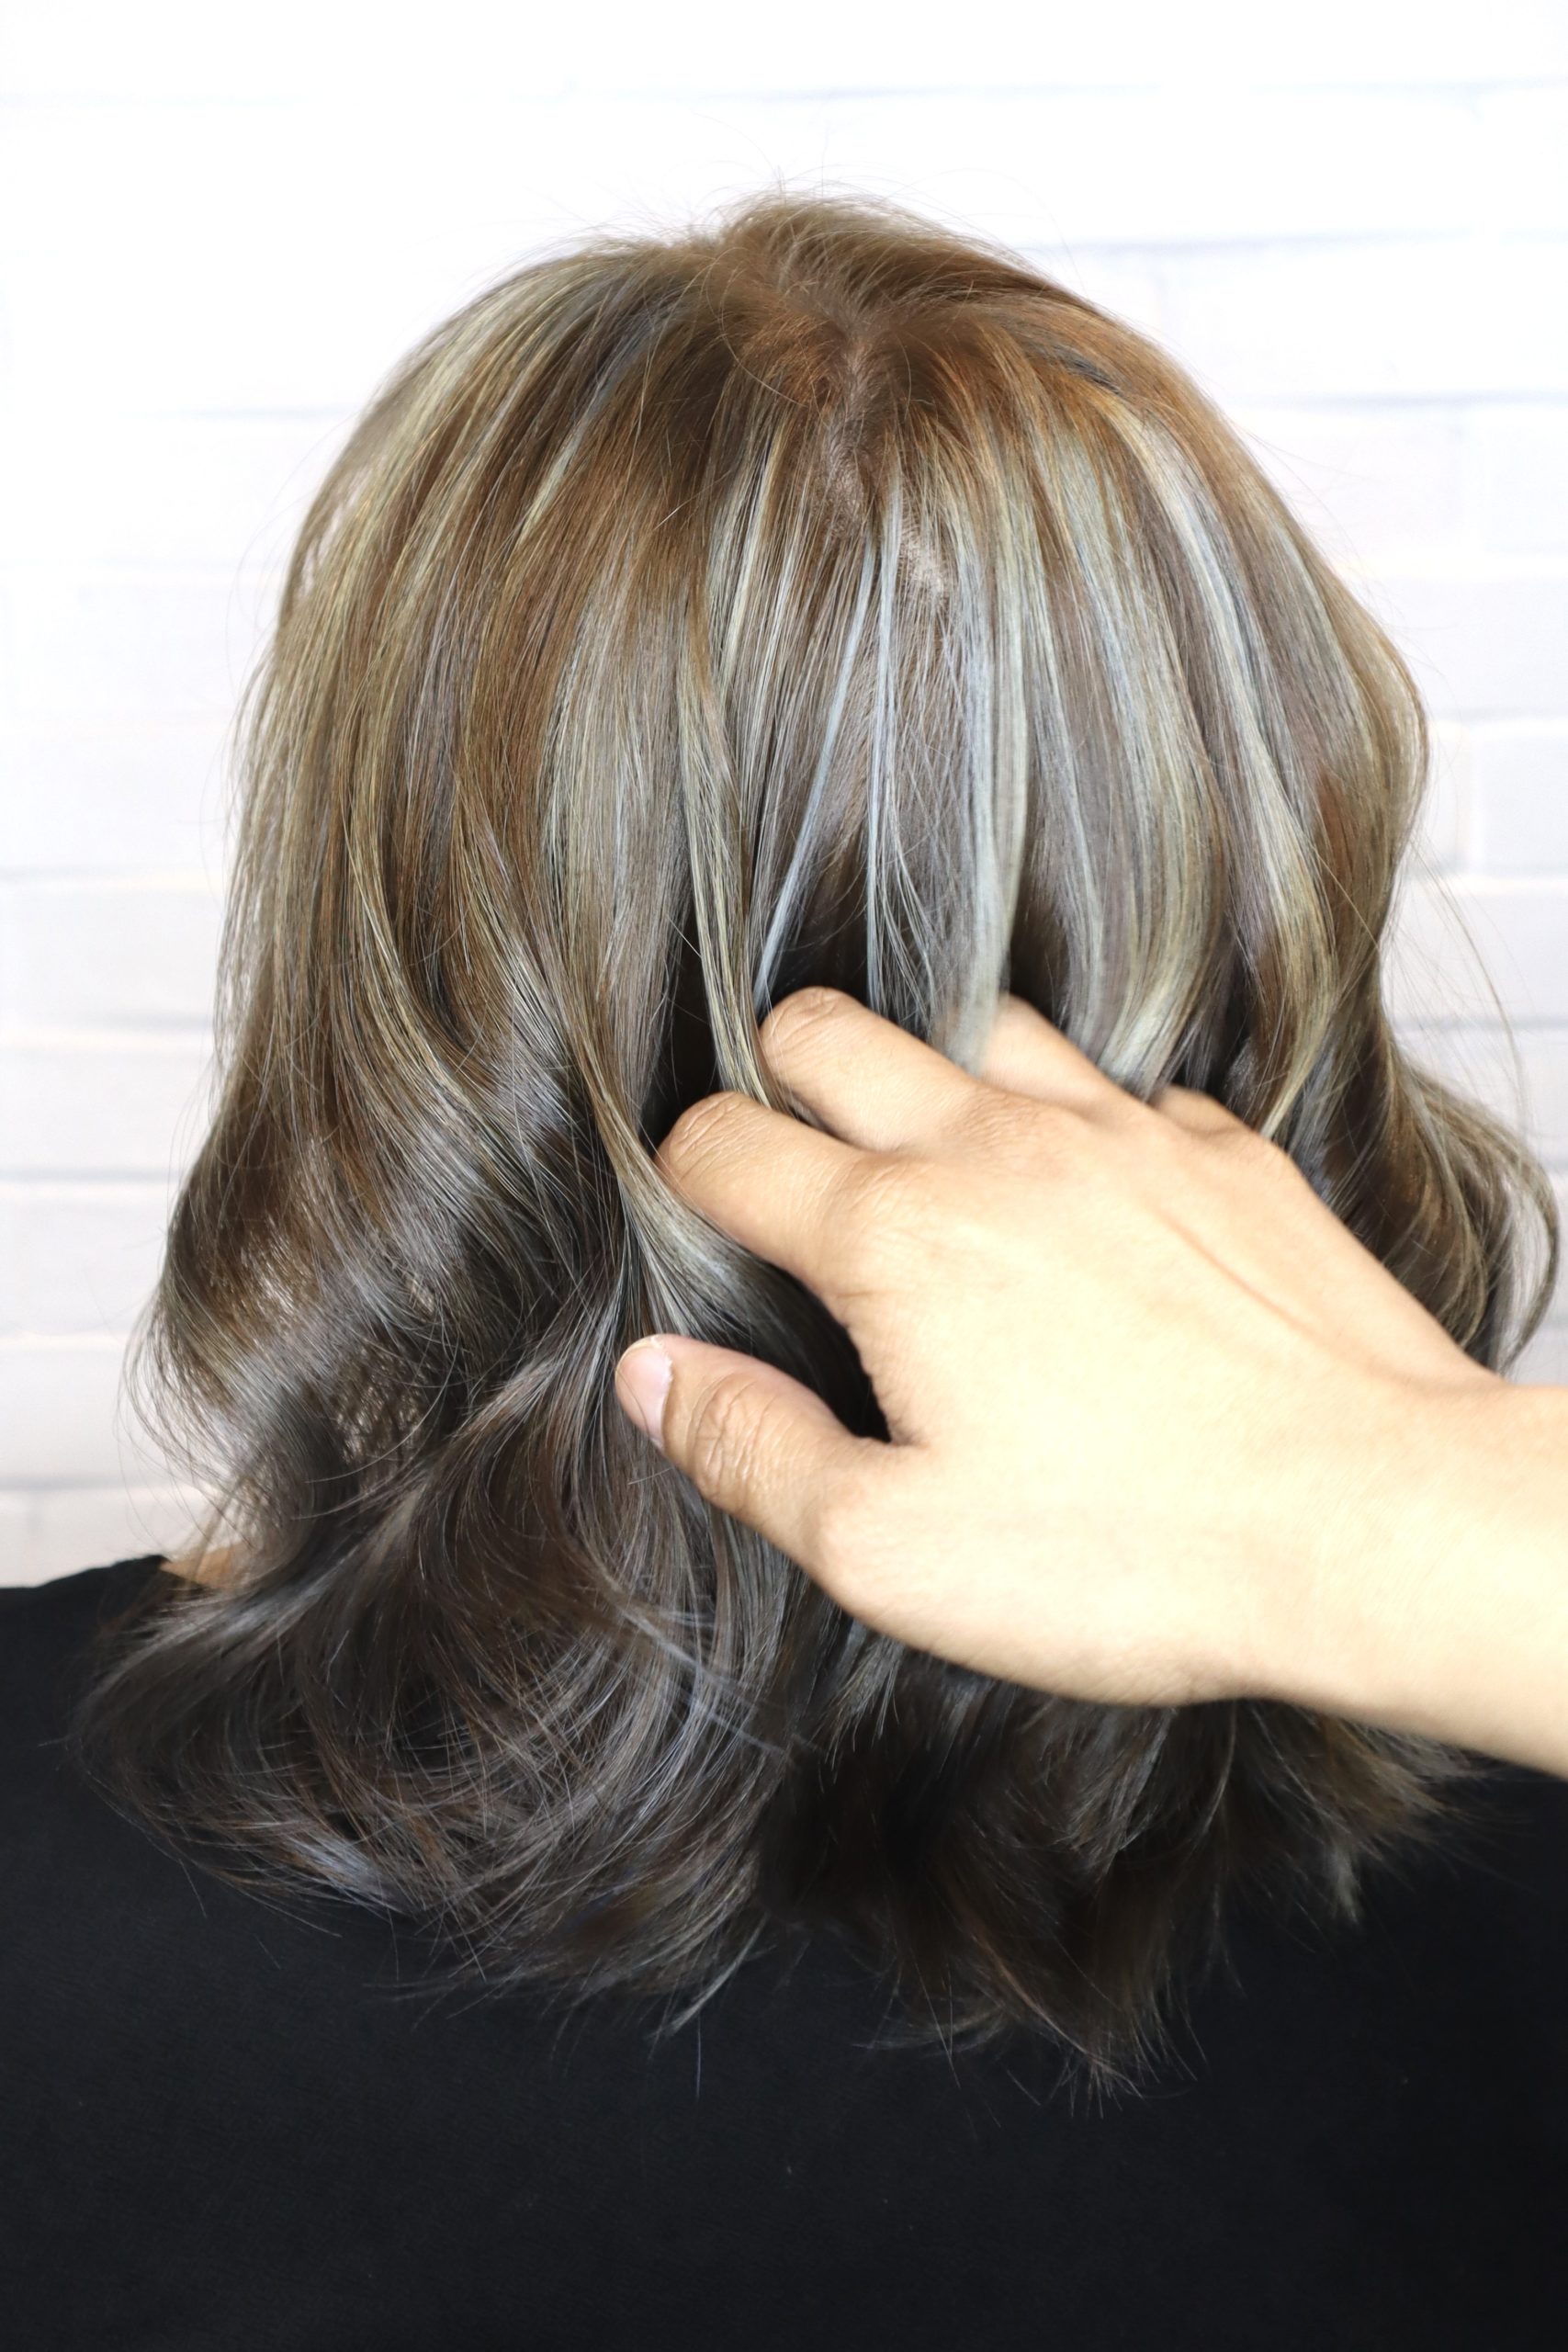 Chunky highlights are another hair trend for the year.